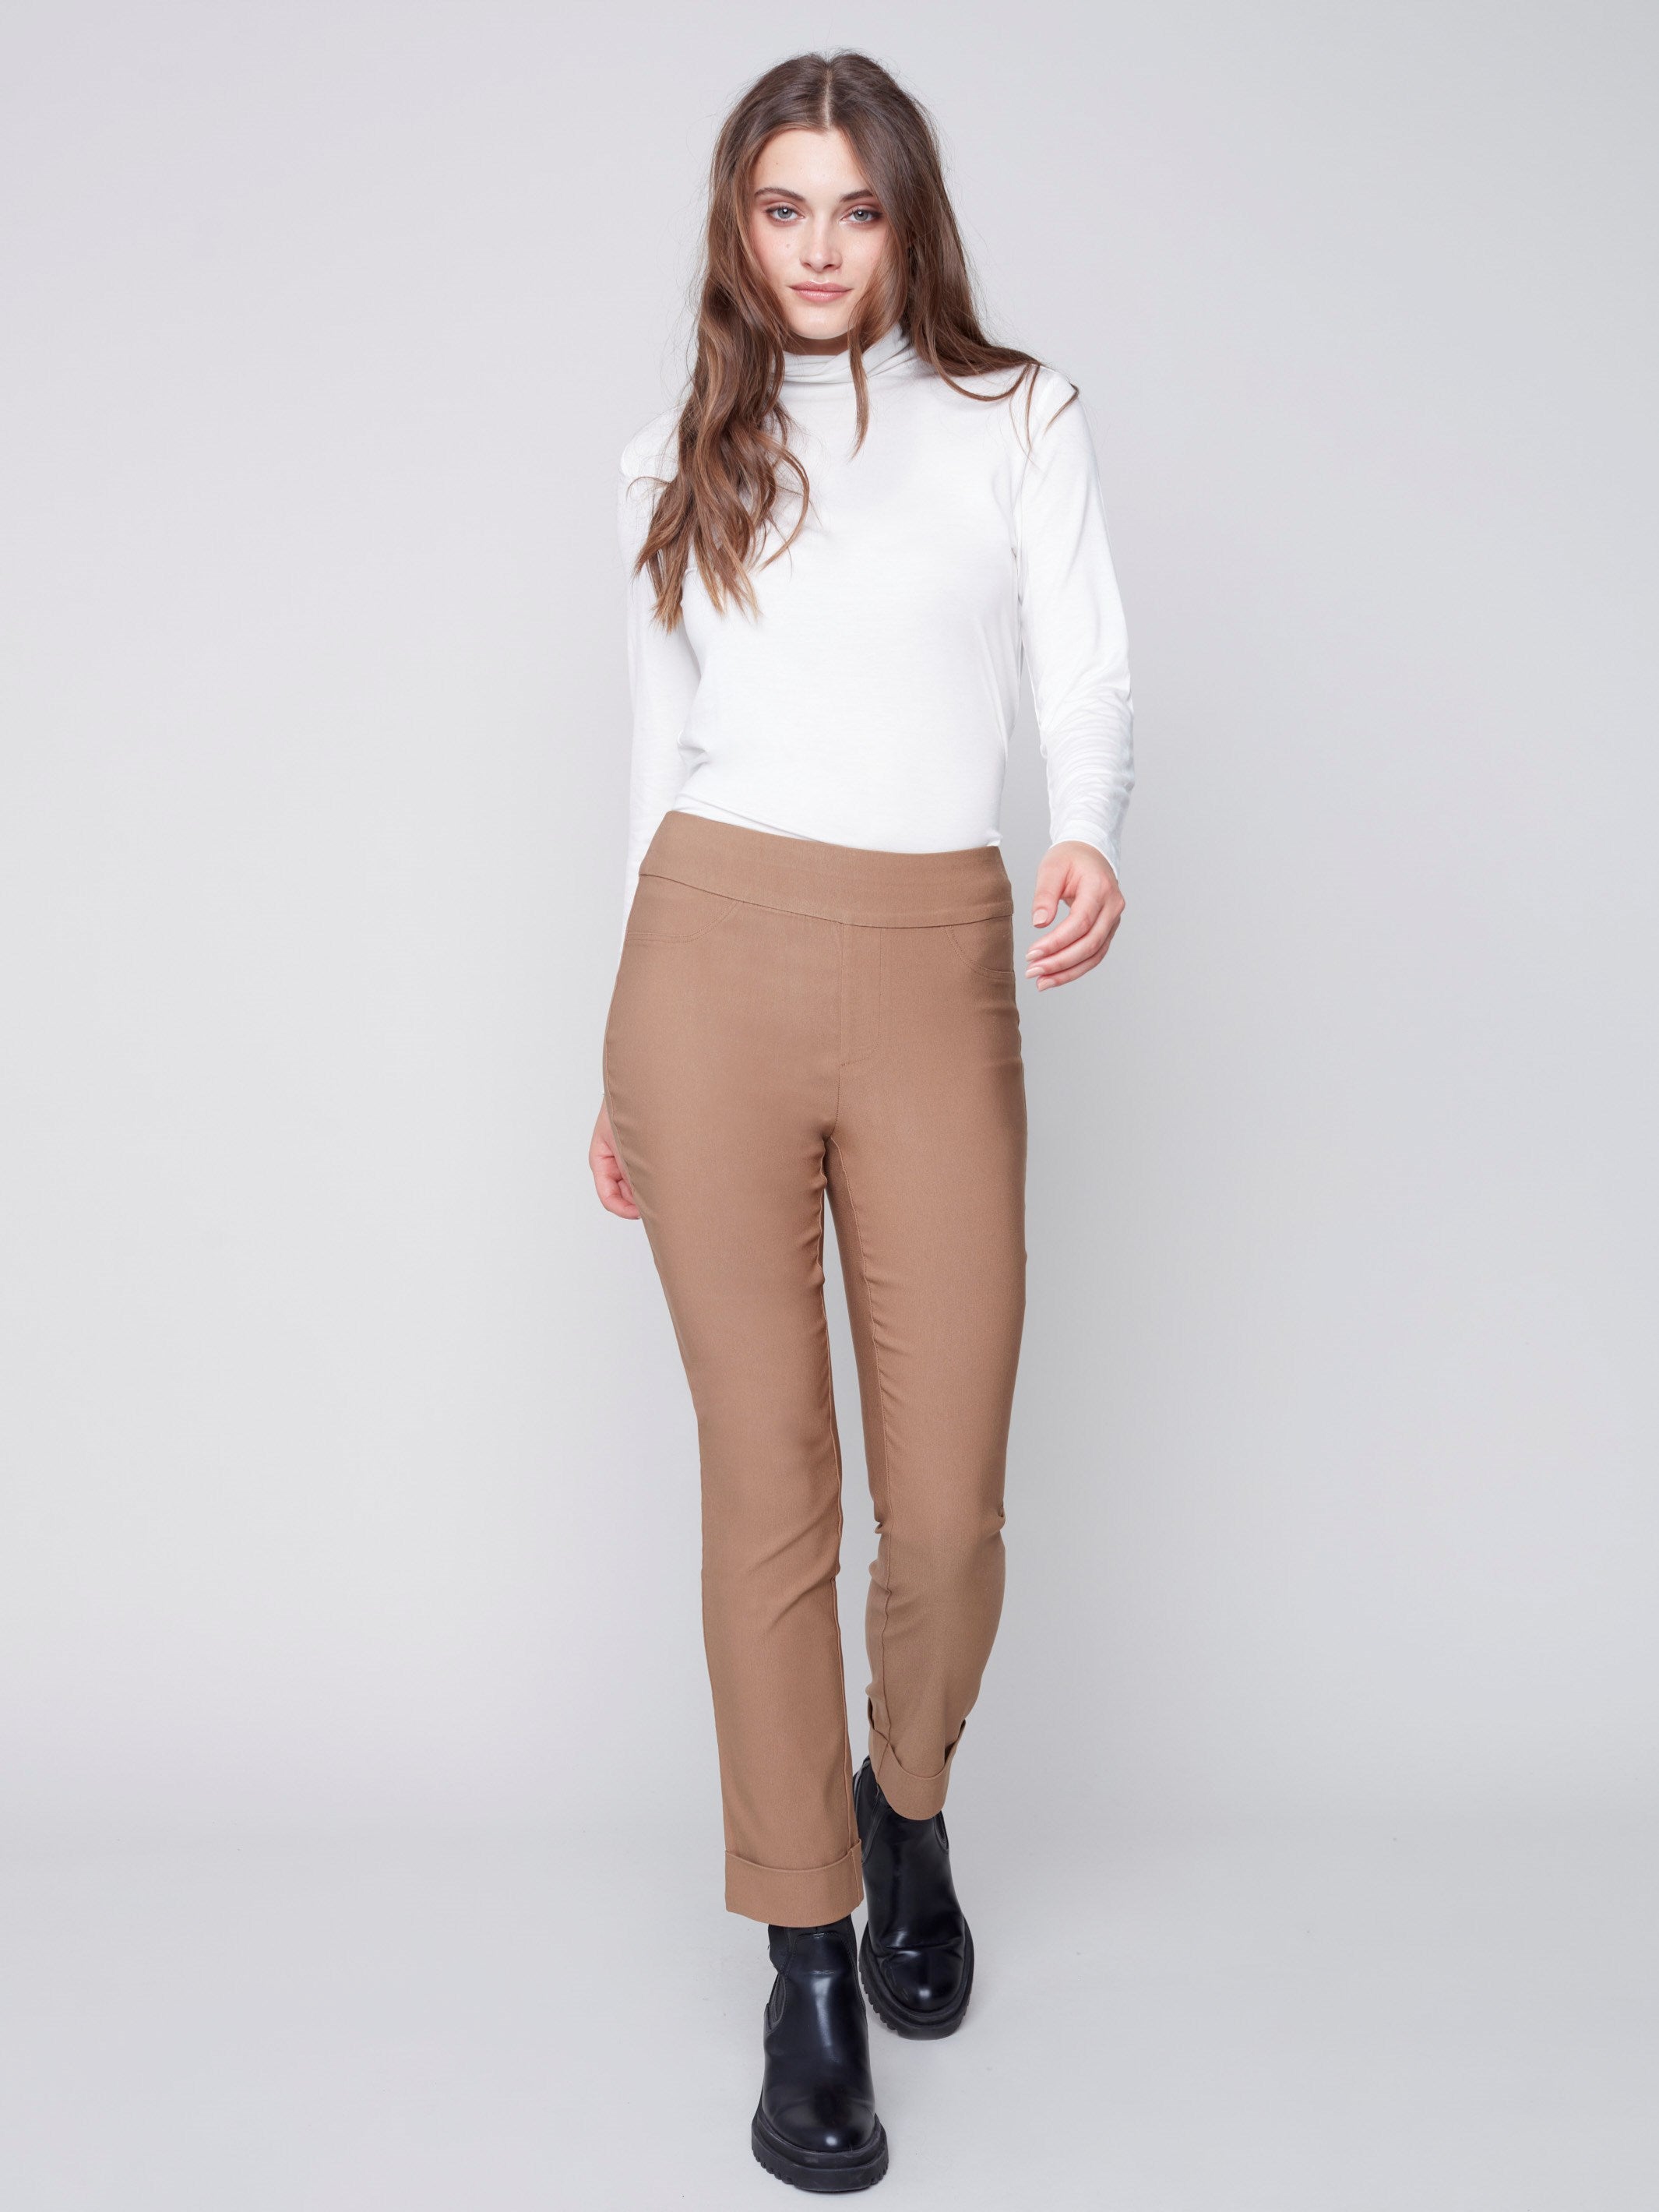 Bengaline Pull-on Pants with Cuff - Truffle